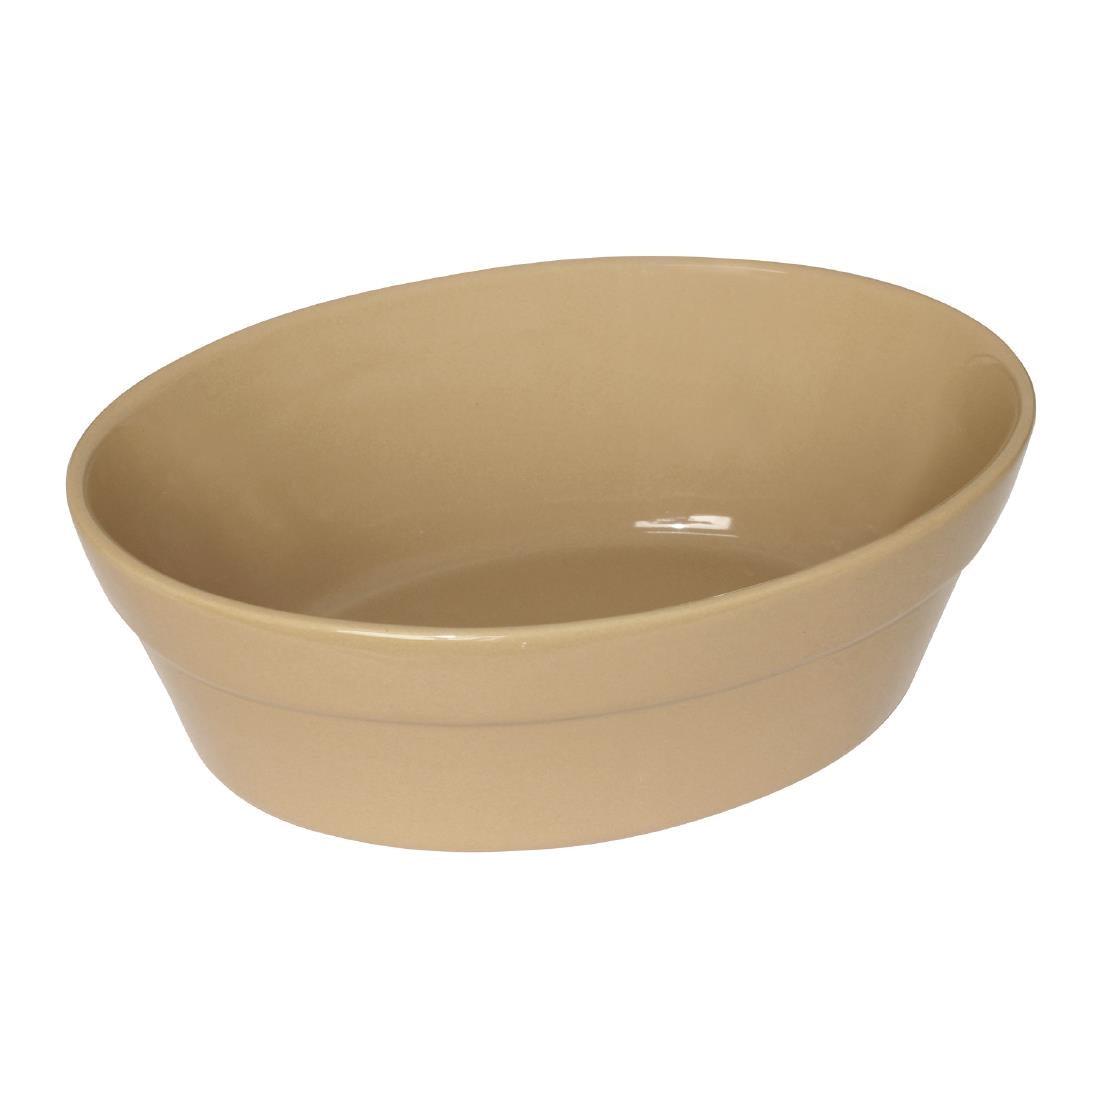 C109 Olympia Stoneware Oval Pie Bowls 180 x 133mm (Pack of 6)